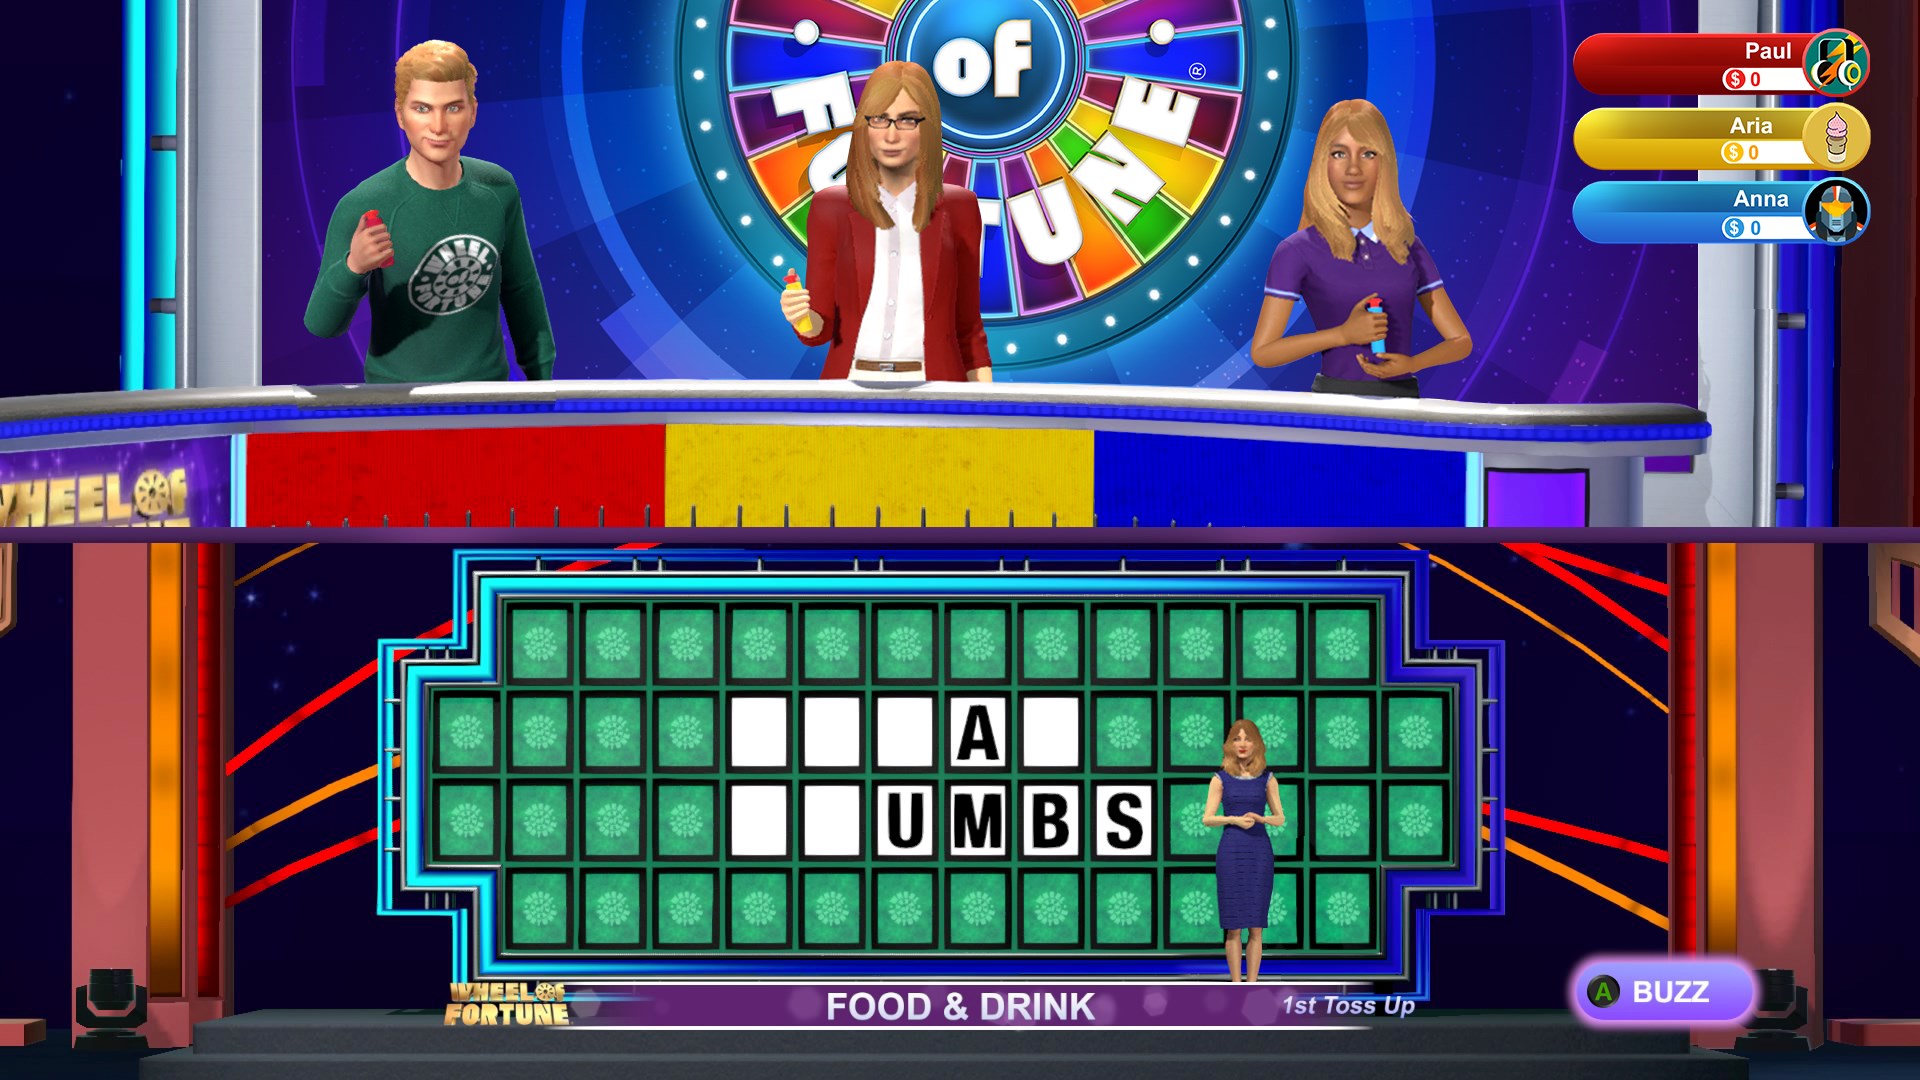 wheel of fortune game xbox one